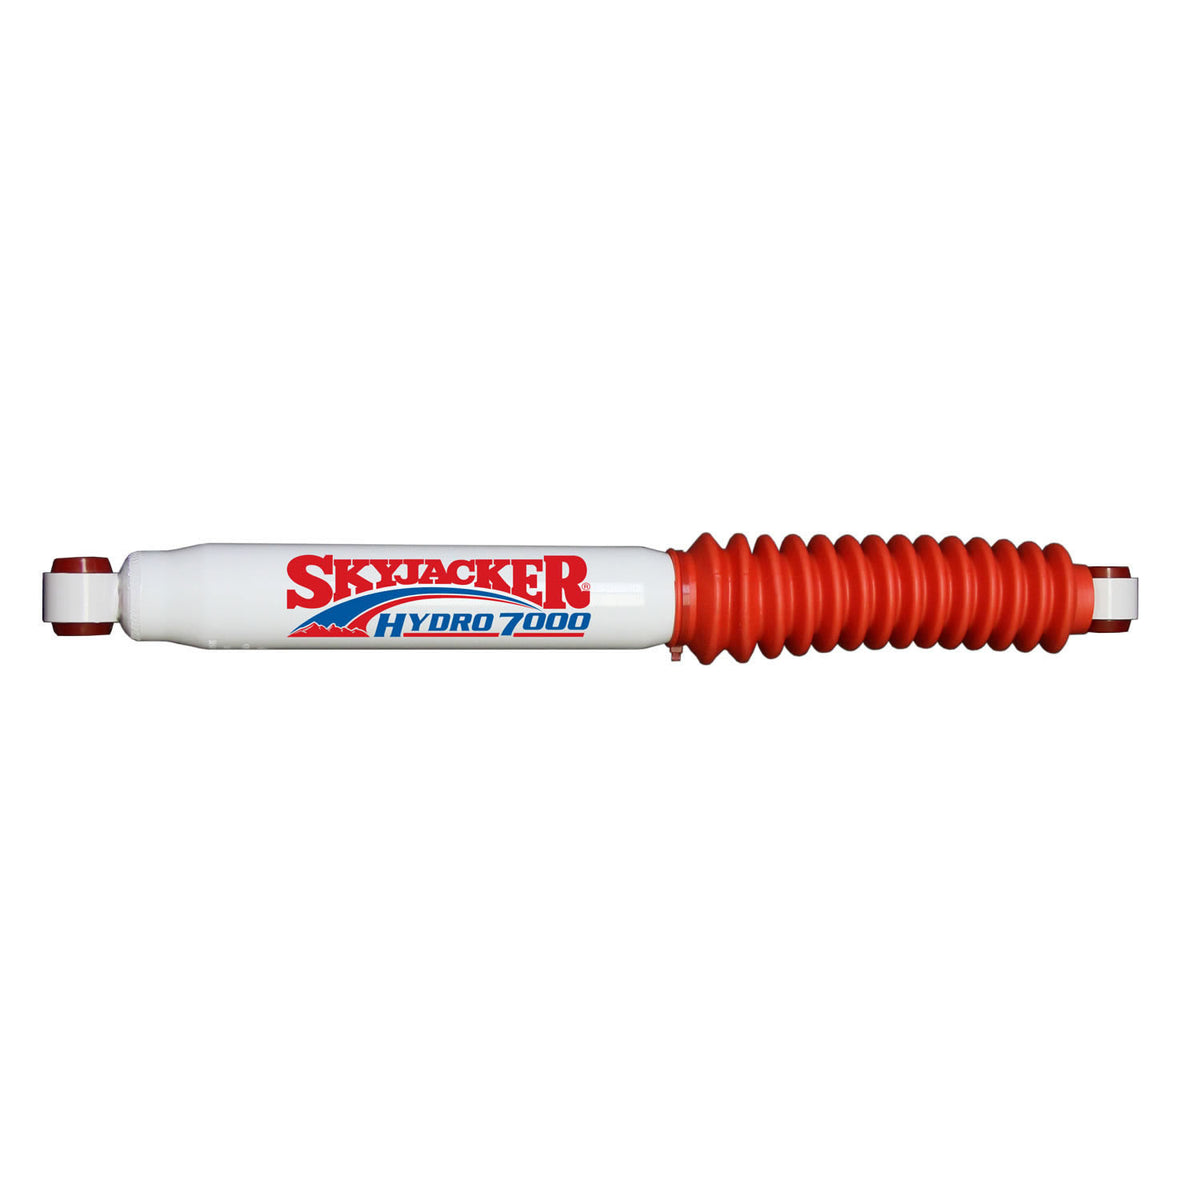 Steering Stabilizer Extended Length 23.9 Inch Collapsed Length 14.35 Inch Replacement Cylinder Only No Hardware Included Skyjacker